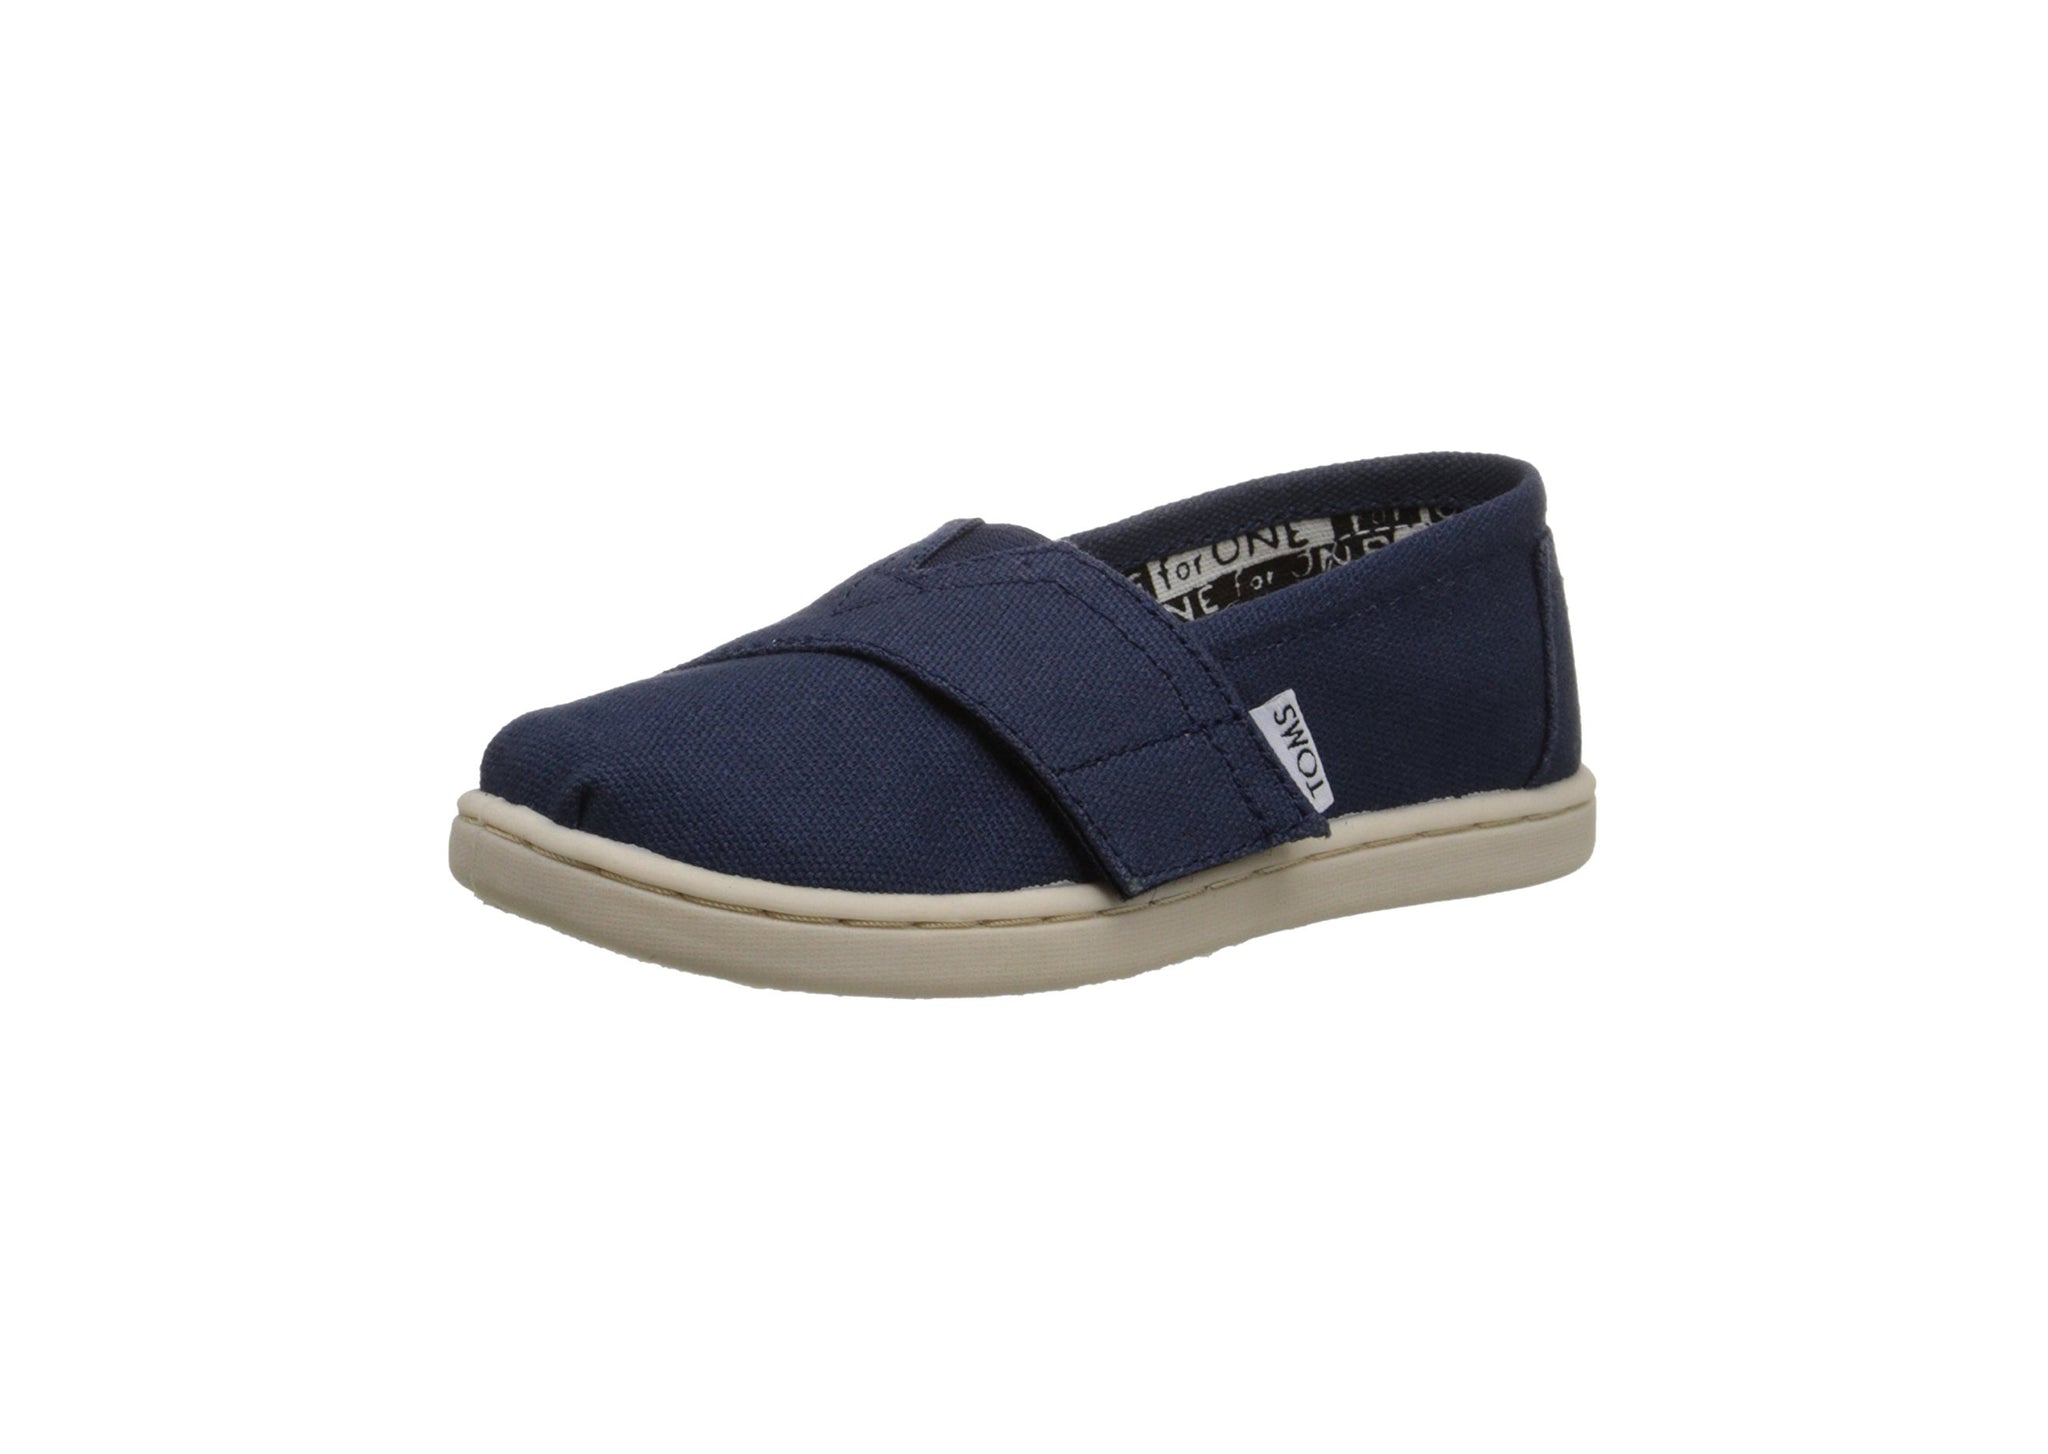 Toms Navy Blue Classic Canvas Slip On Infant Toddlers Shoes